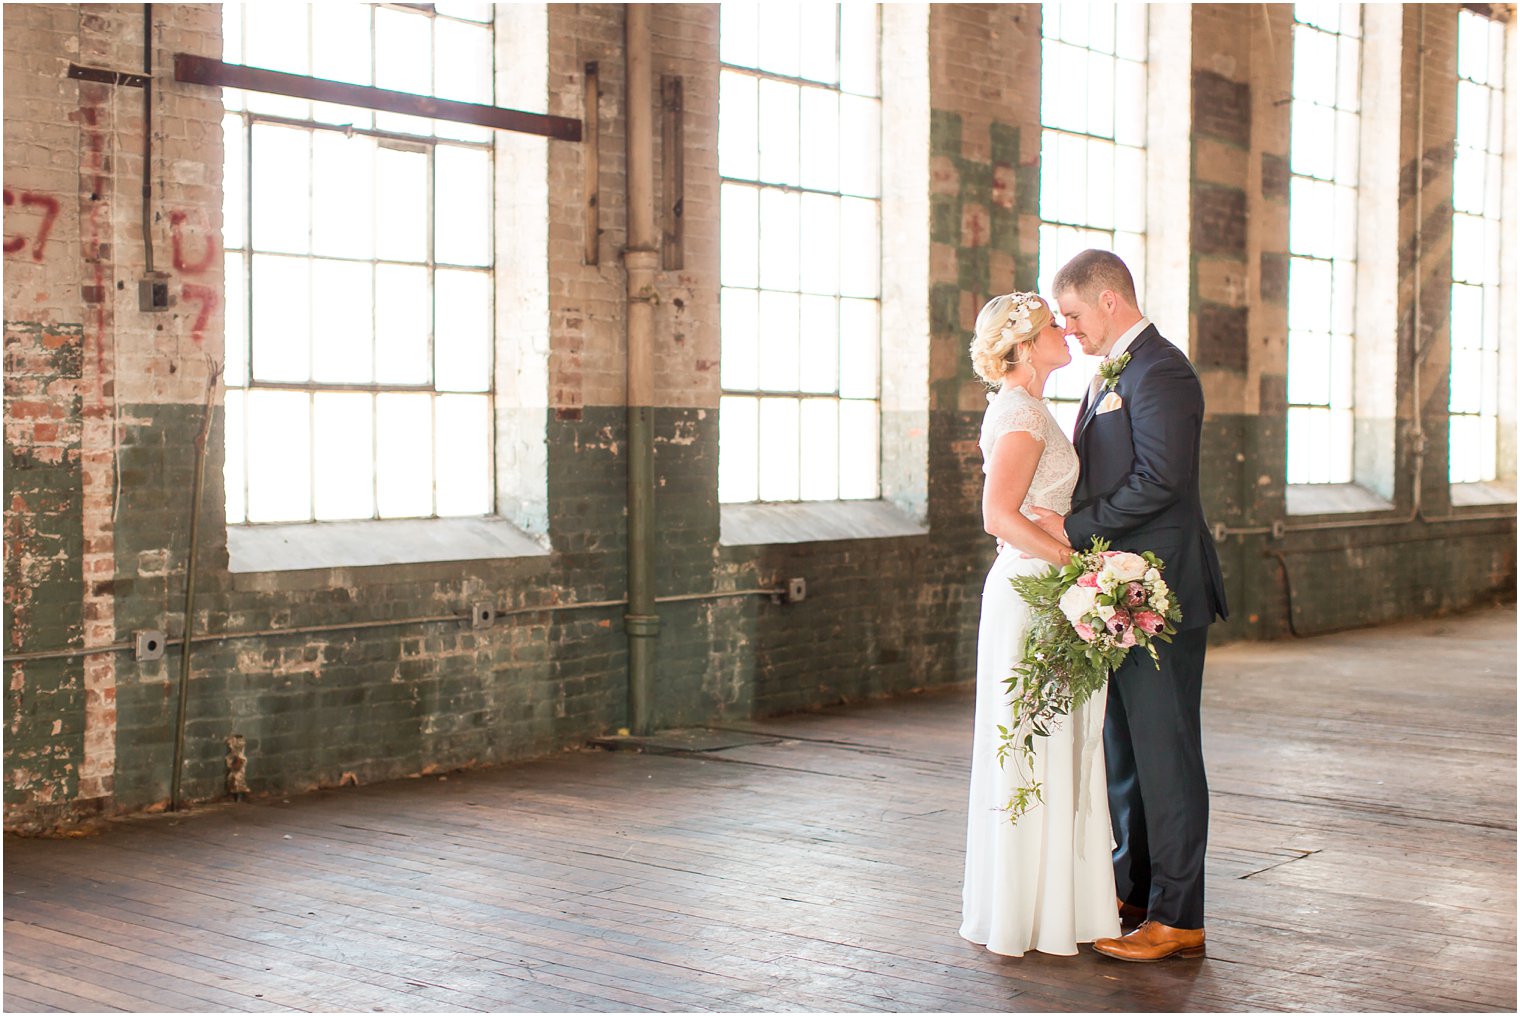 Wedding photo at The Art Factory